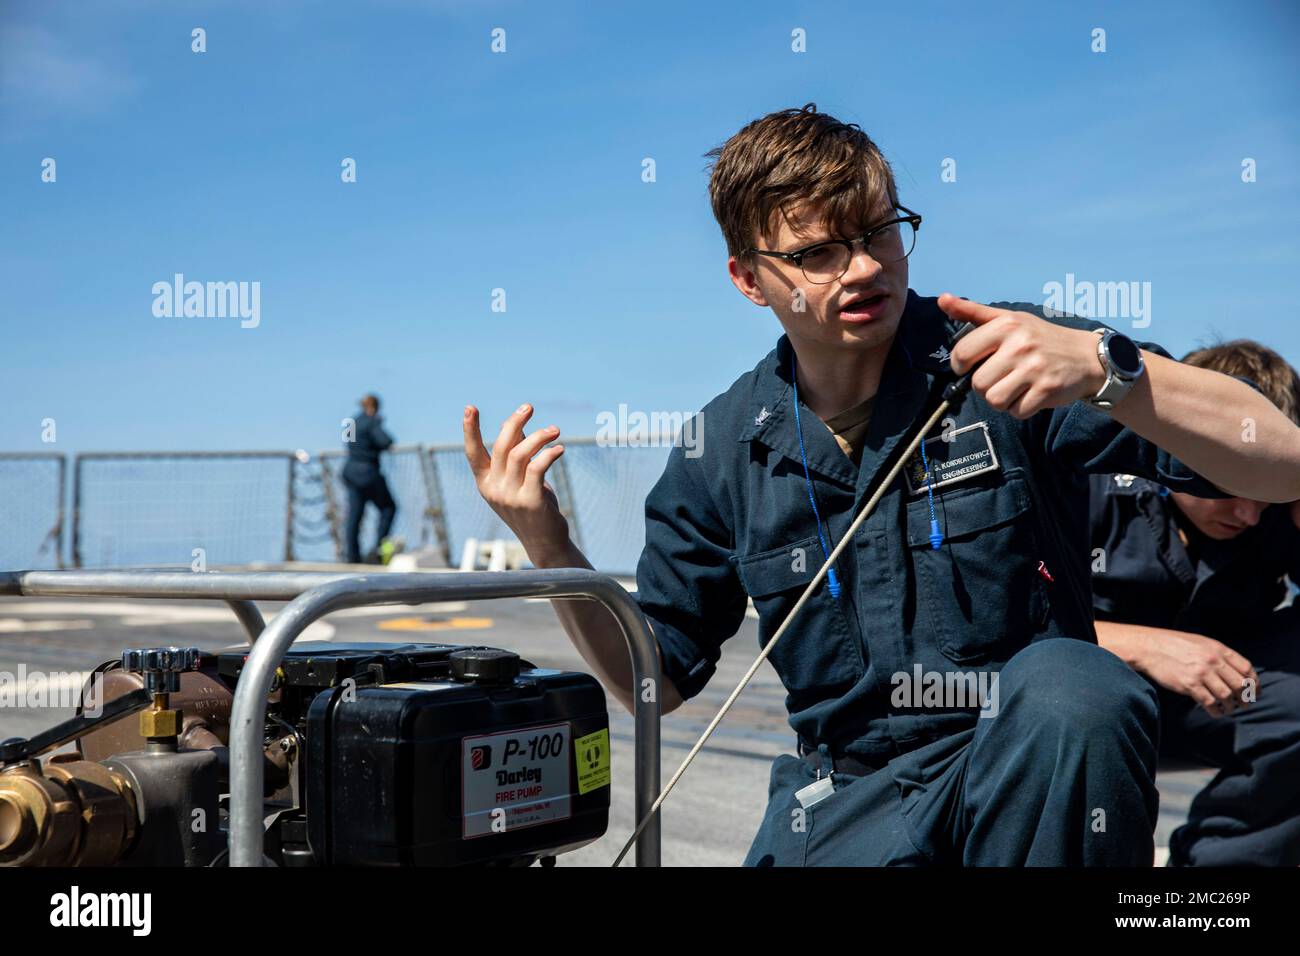 220623-N-UL352-1008 ATLANTIC OCEAN (June 23, 2022) Damage Controlman 3rd Class Garrett Kondratowicz, assigned to Arleigh Burke-class guided-missile destroyer USS Delbert D. Black (DDG 119), trains Sailors on the use of a portable suction pump, June 23, 2022. The George H.W. Bush Carrier Strike Group (CSG) is underway completing a certification exercise to increase U.S. and allied interoperability and warfighting capability before a future deployment. The George H.W. Bush CSG is an integrated combat weapons system that delivers superior combat capability to deter, and if necessary, defeat Ameri Stock Photo